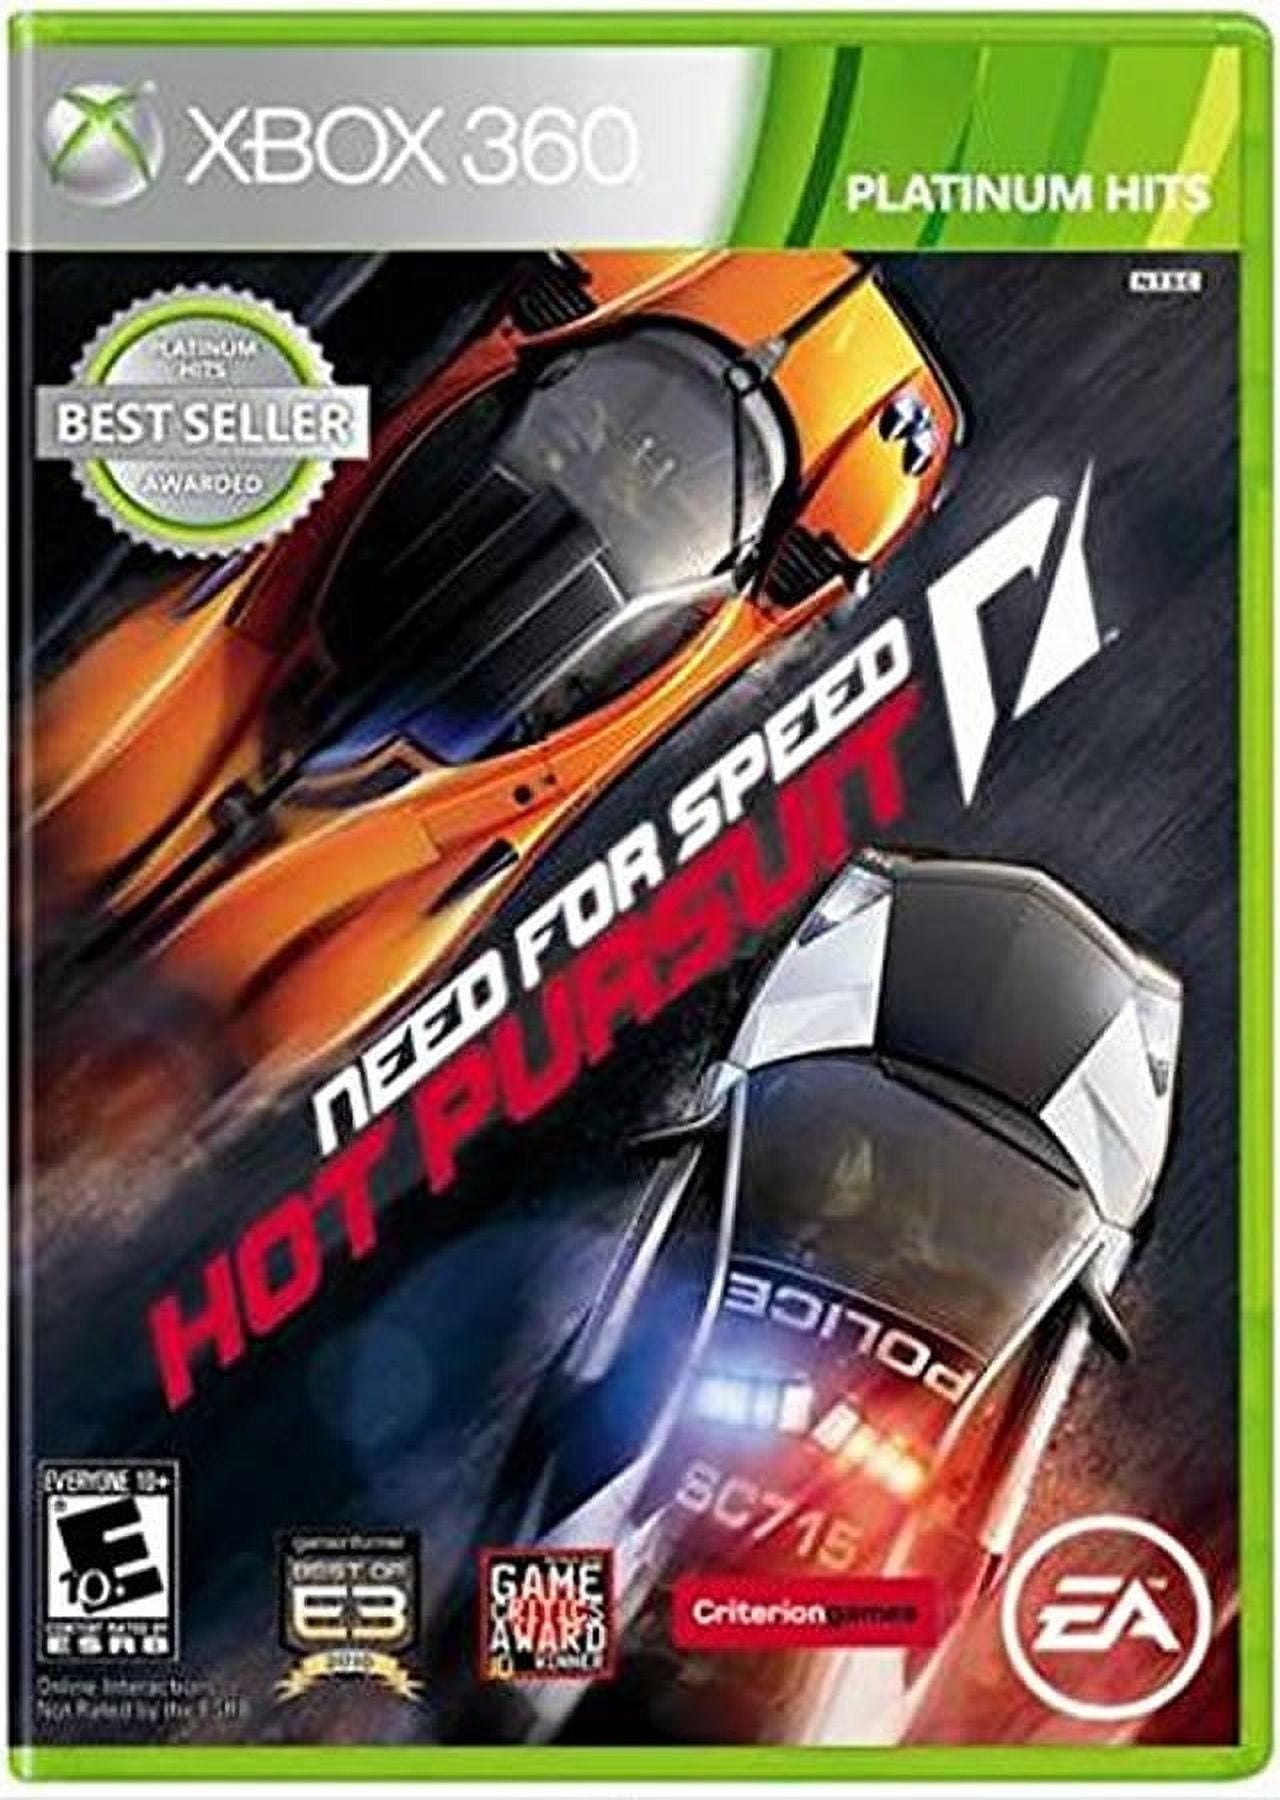 Need For Speed Heat (Seminovo) - Xbox One - ZEUS GAMES - A única